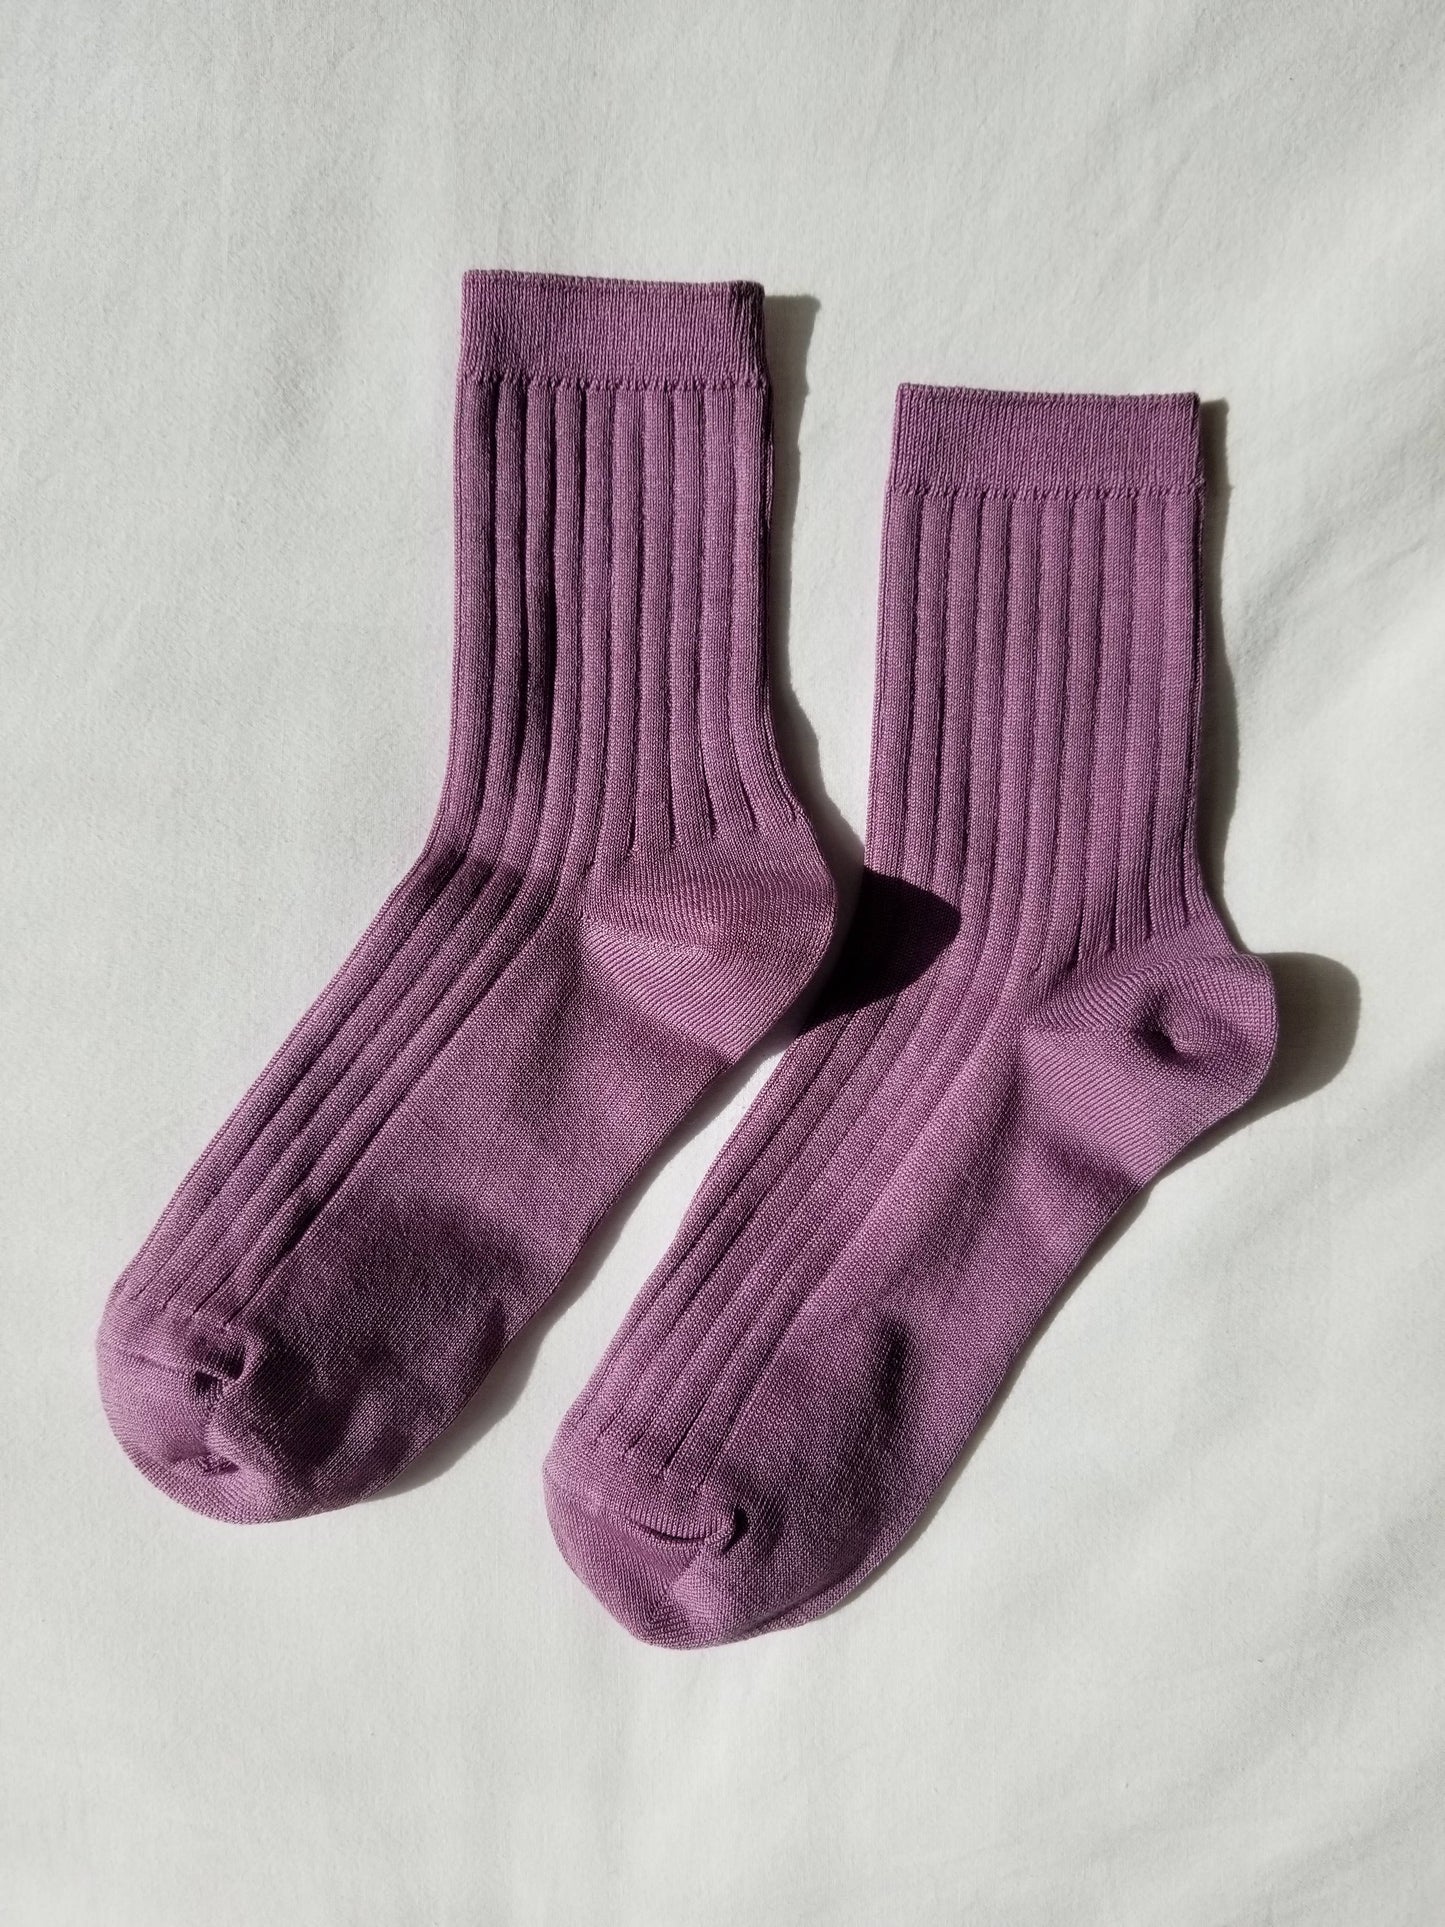 Her Socks - Mercerized Combed Cotton Rib - The Crowd Went Wild